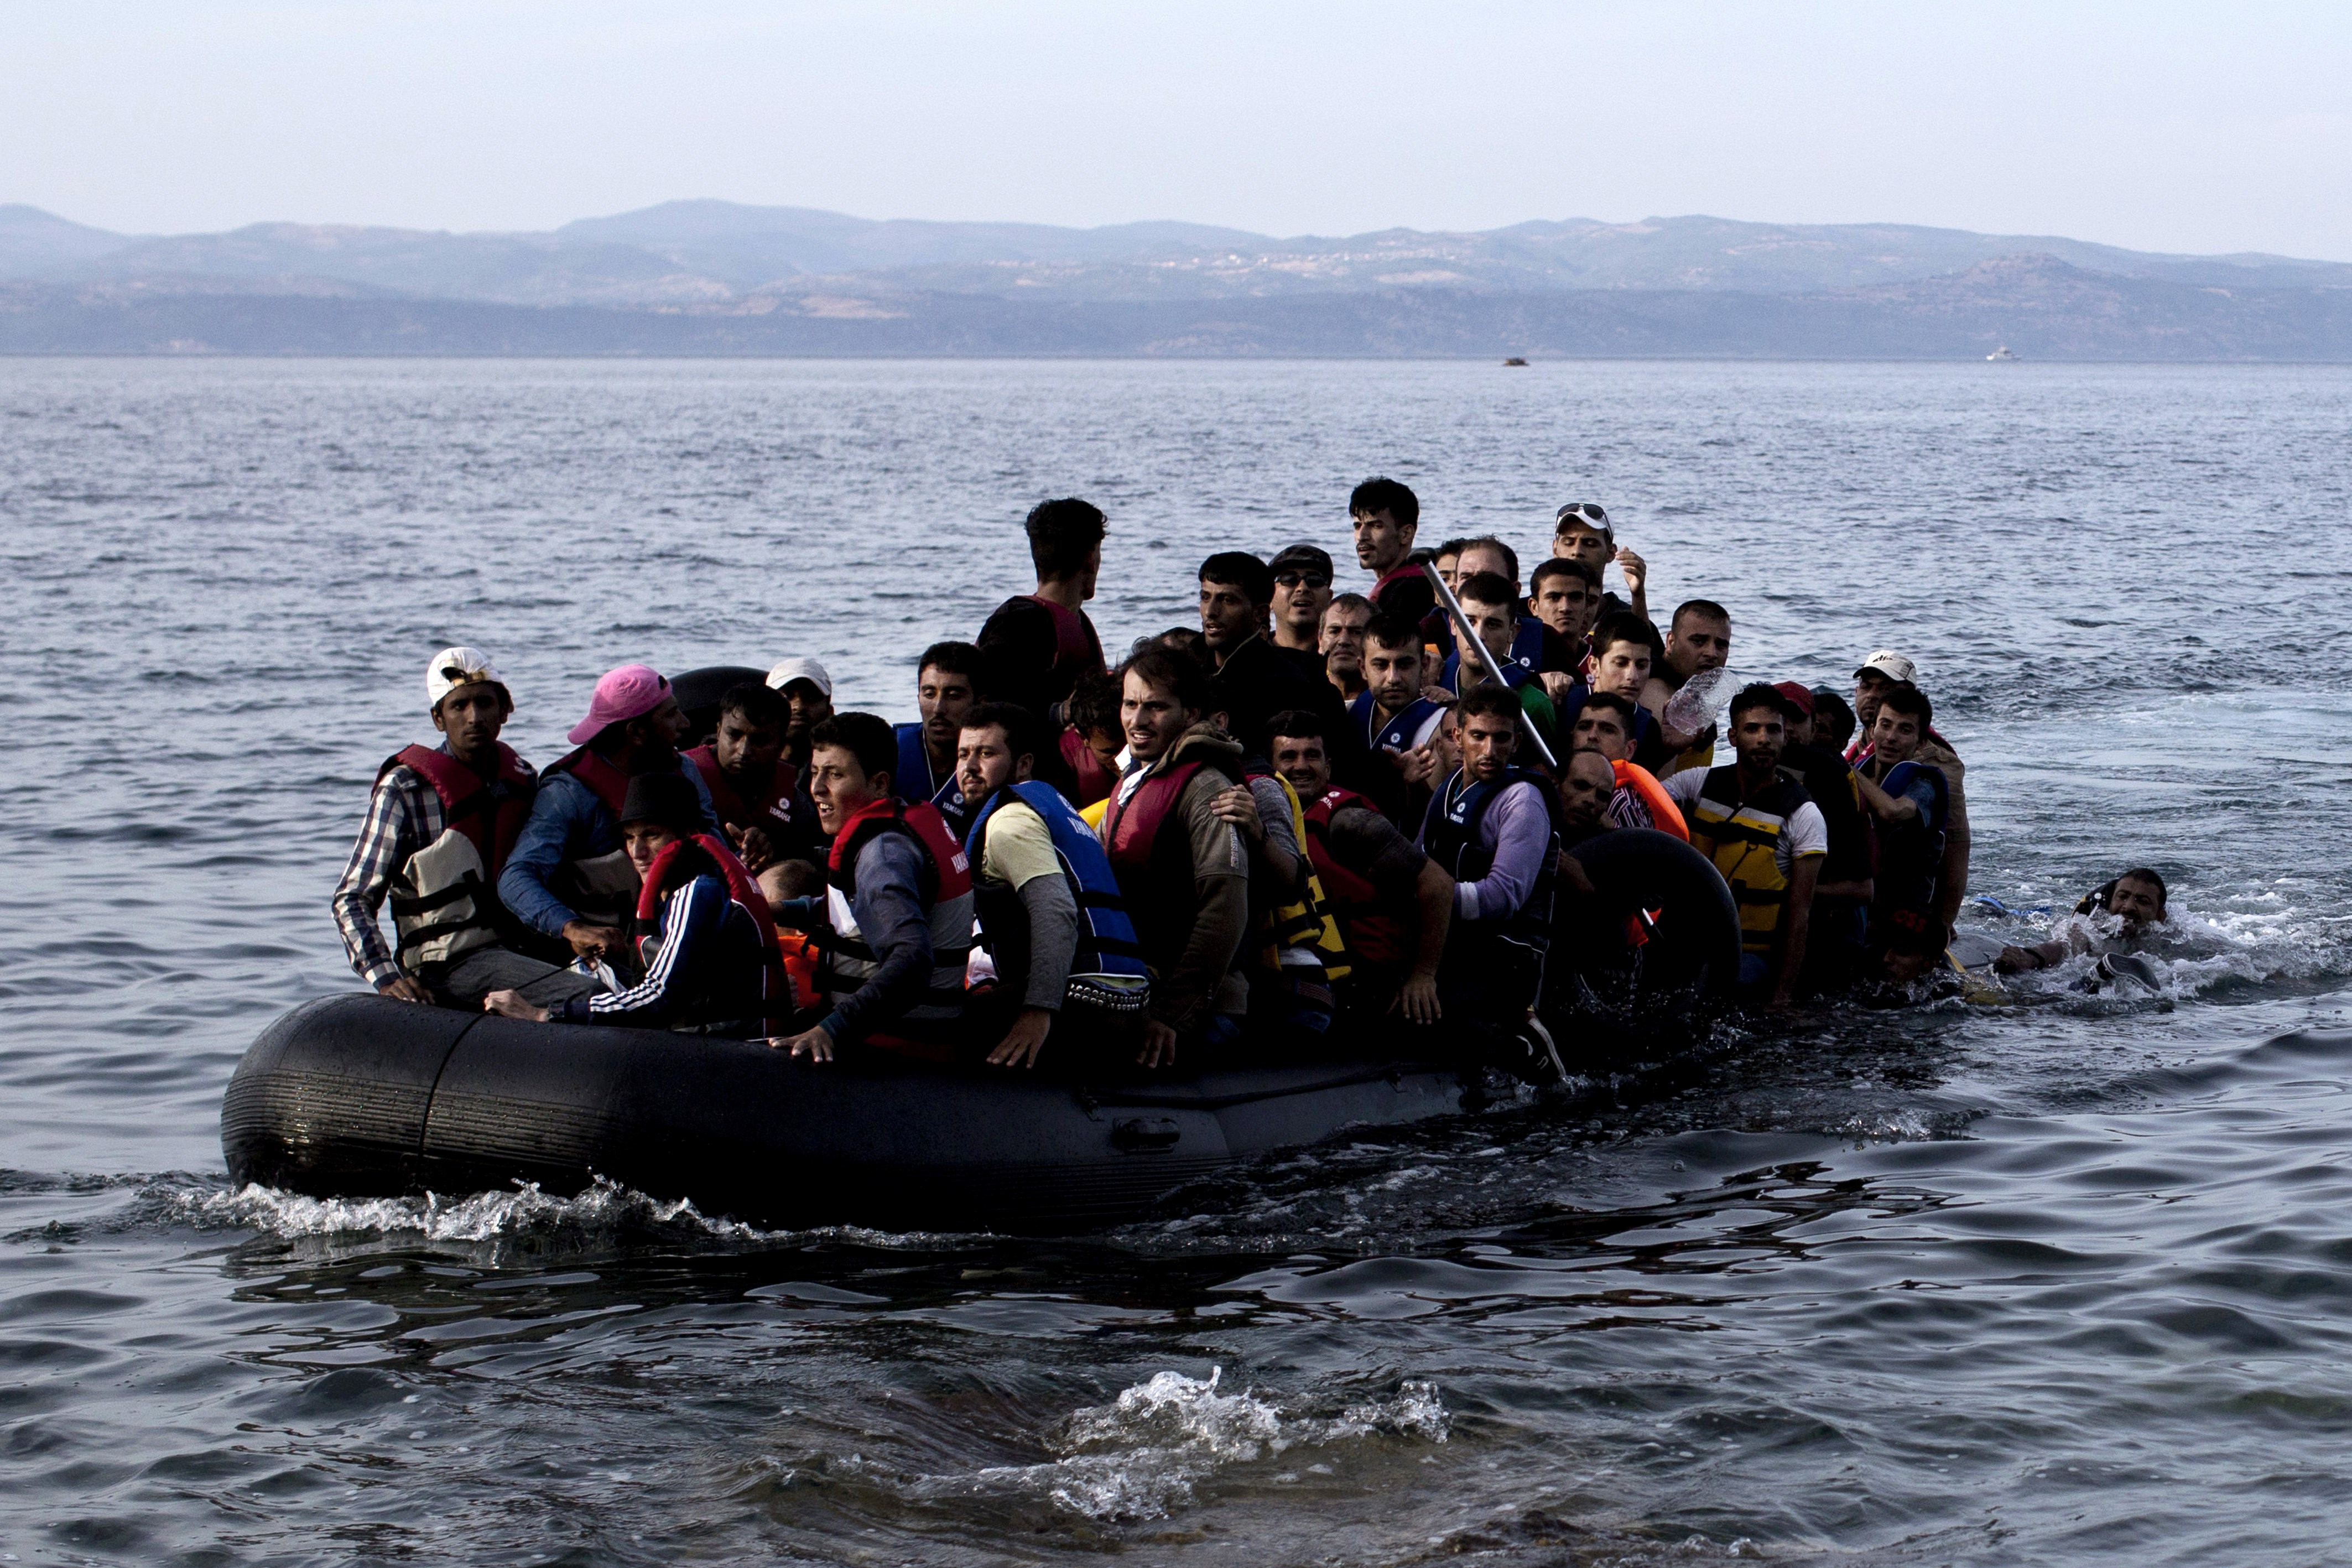 Refugees and migrants arrive on the shores of the Greek island of Lesbos after crossing the Aegean Sea from Turkey on an inflatable boat on September 9, 2015.